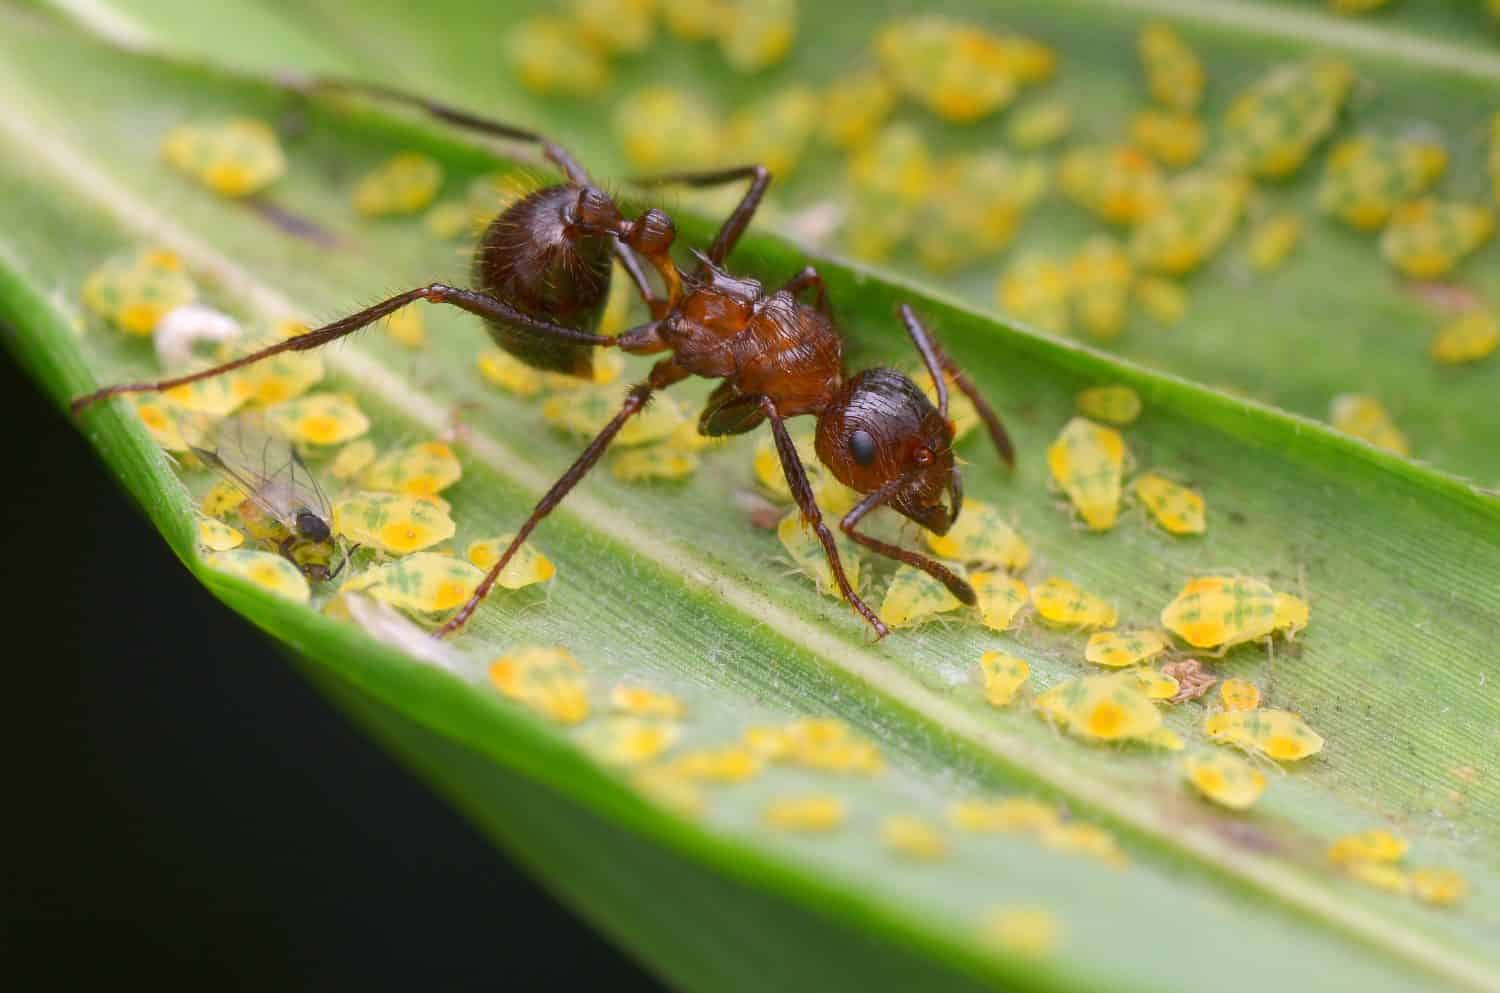 Ants Harvesting Aphids, Mutualism in Nature